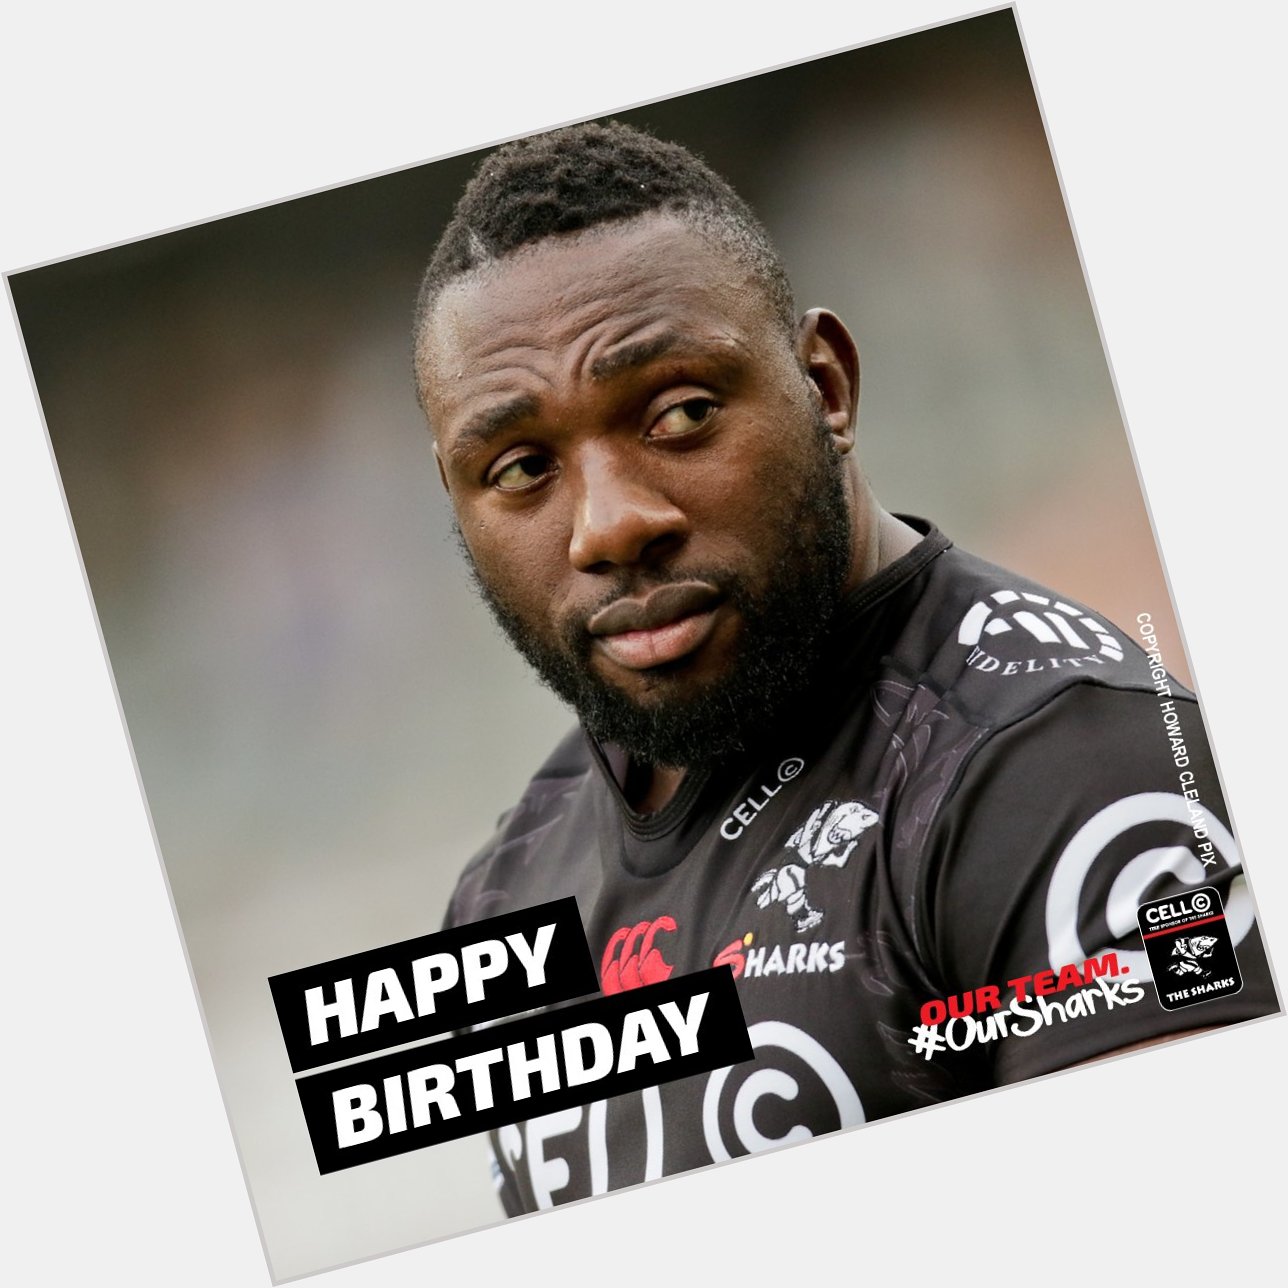 A Happy Birthday shout out to one of legends, Tendai Mtawarira! 